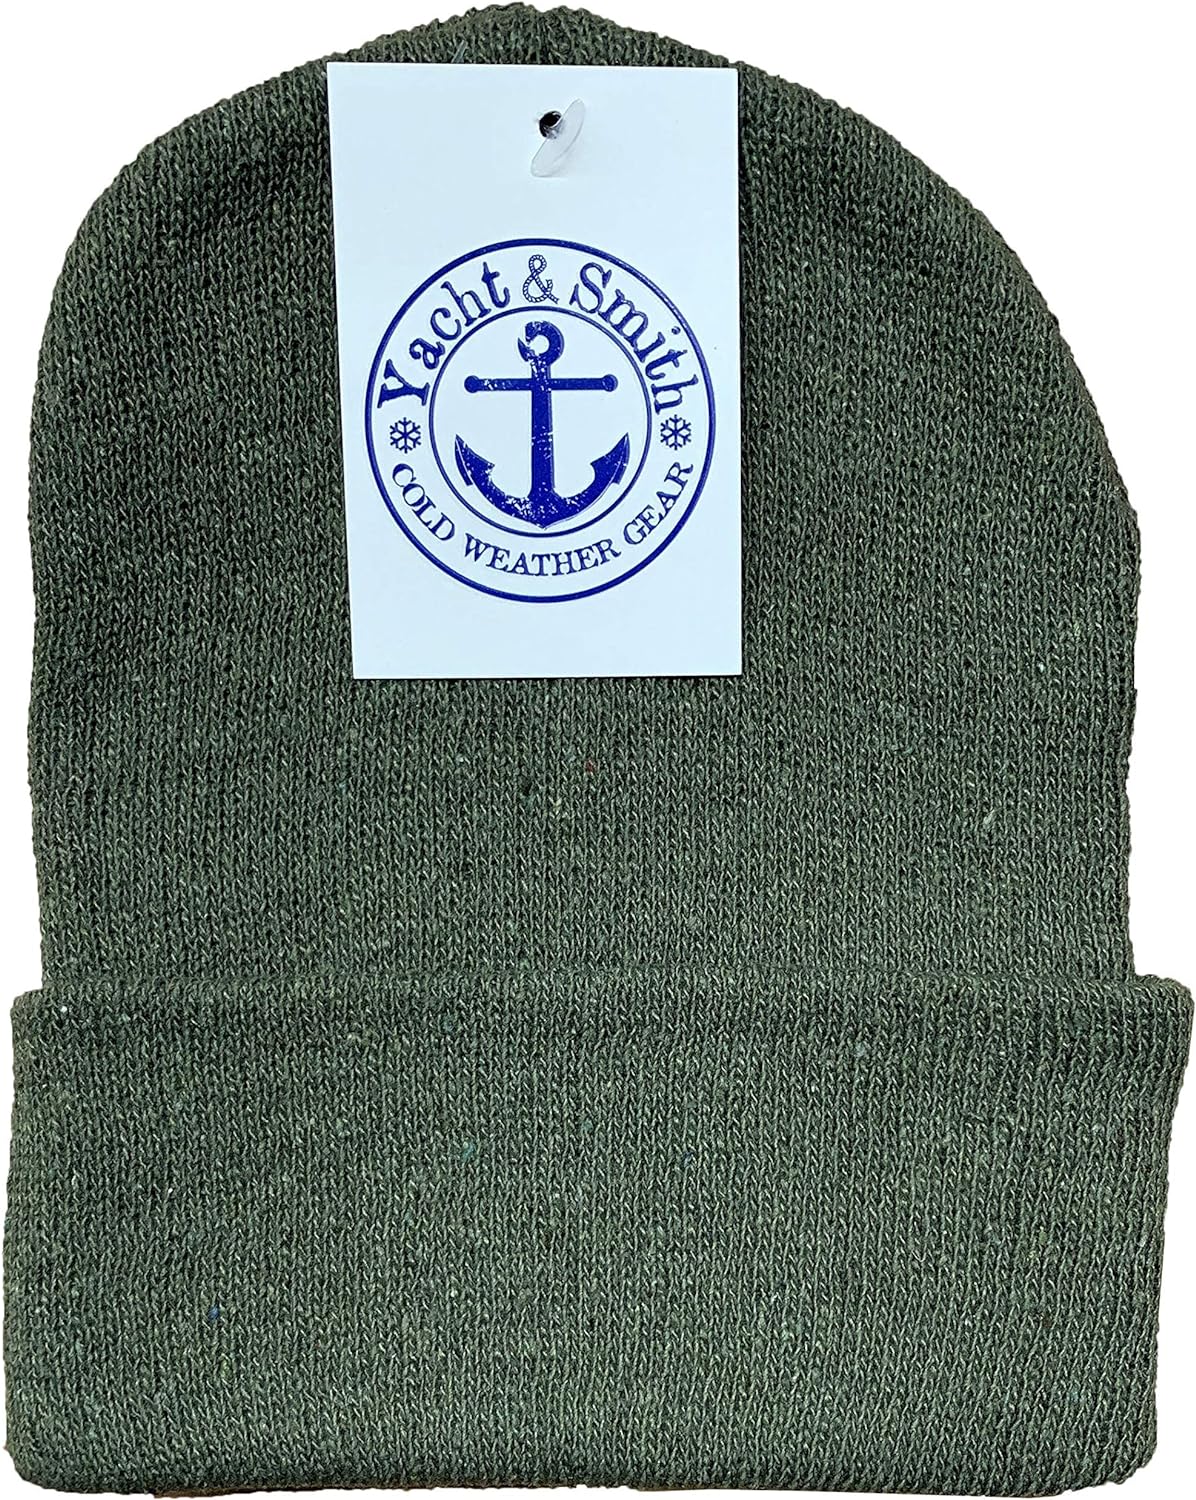 Yacht & Smith Wholesale Kids Beanie And Glove Sets